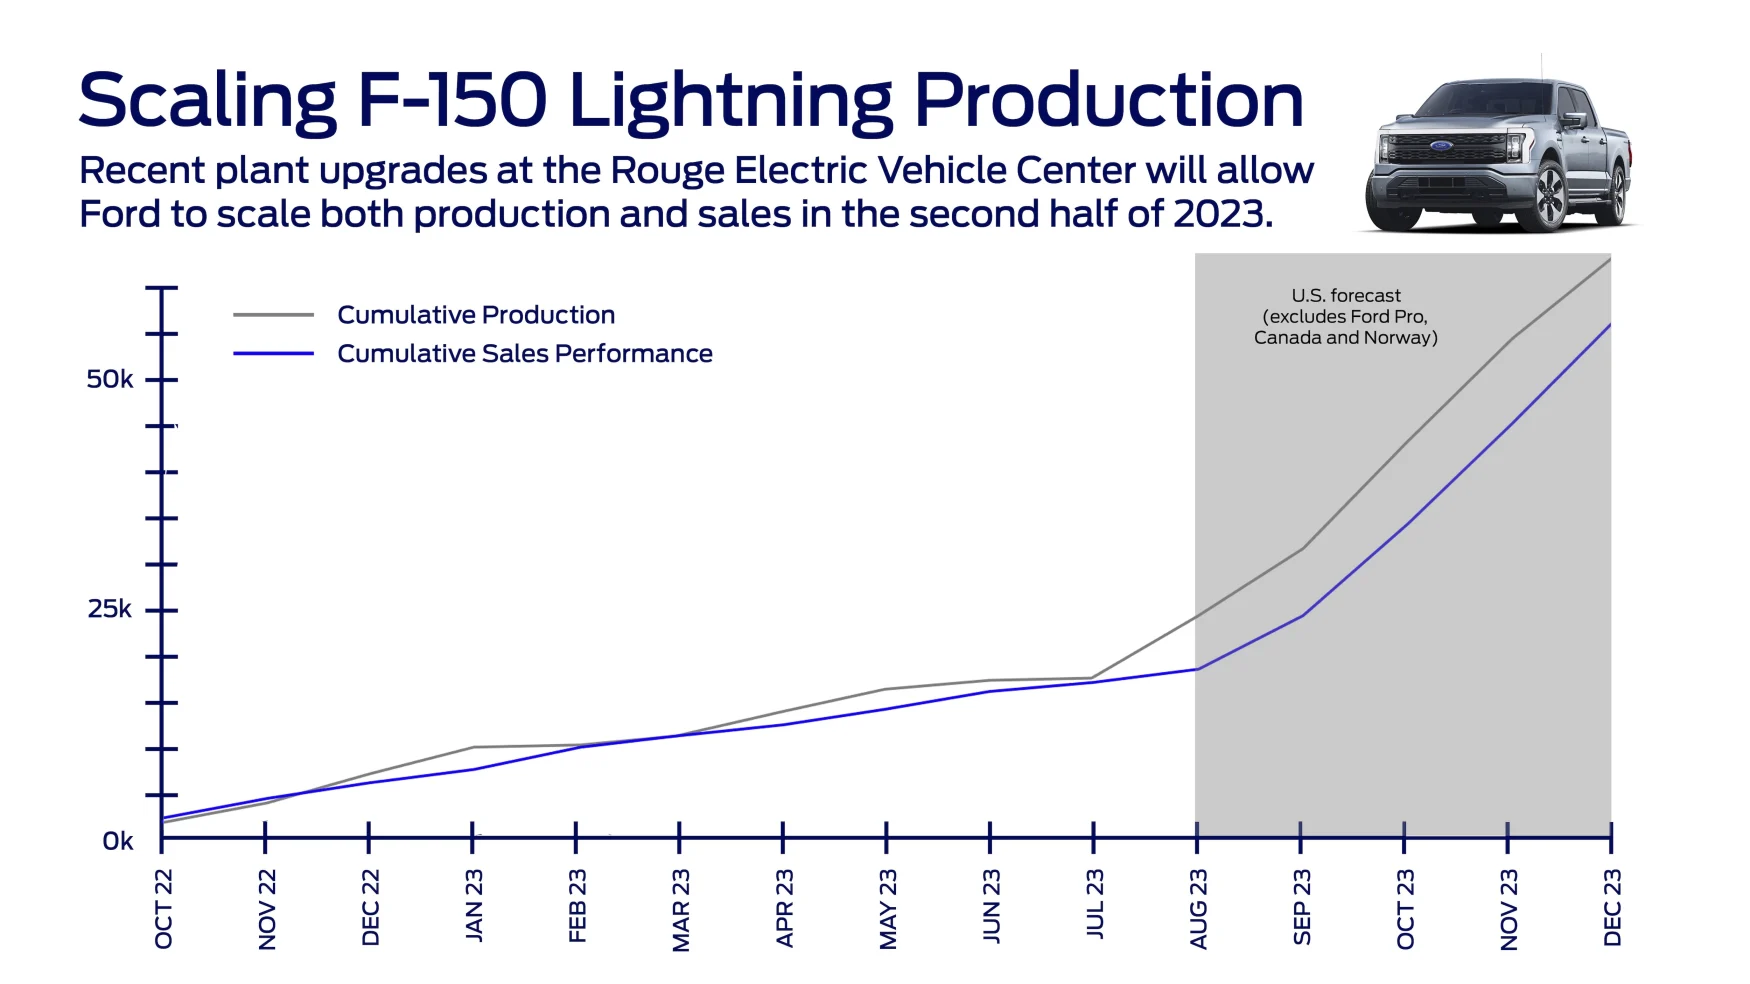 A Ford line graph showing anticipated (rising) production of the F-150 Lightning for the rest of 2023.